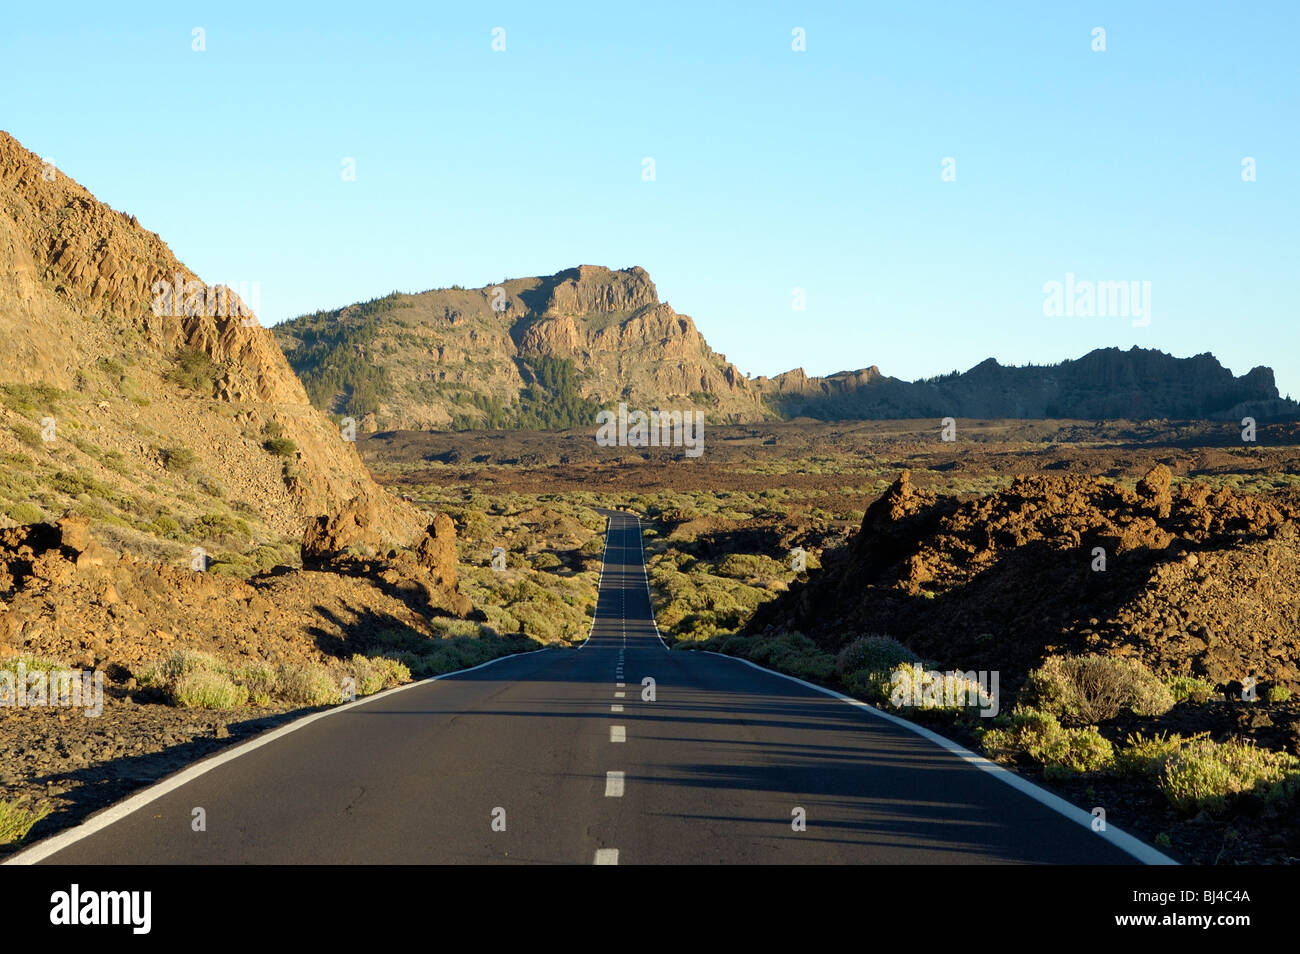 Spain, Canary Islands, Tenerife Teide National Park, volcano landscape with road Stock Photo